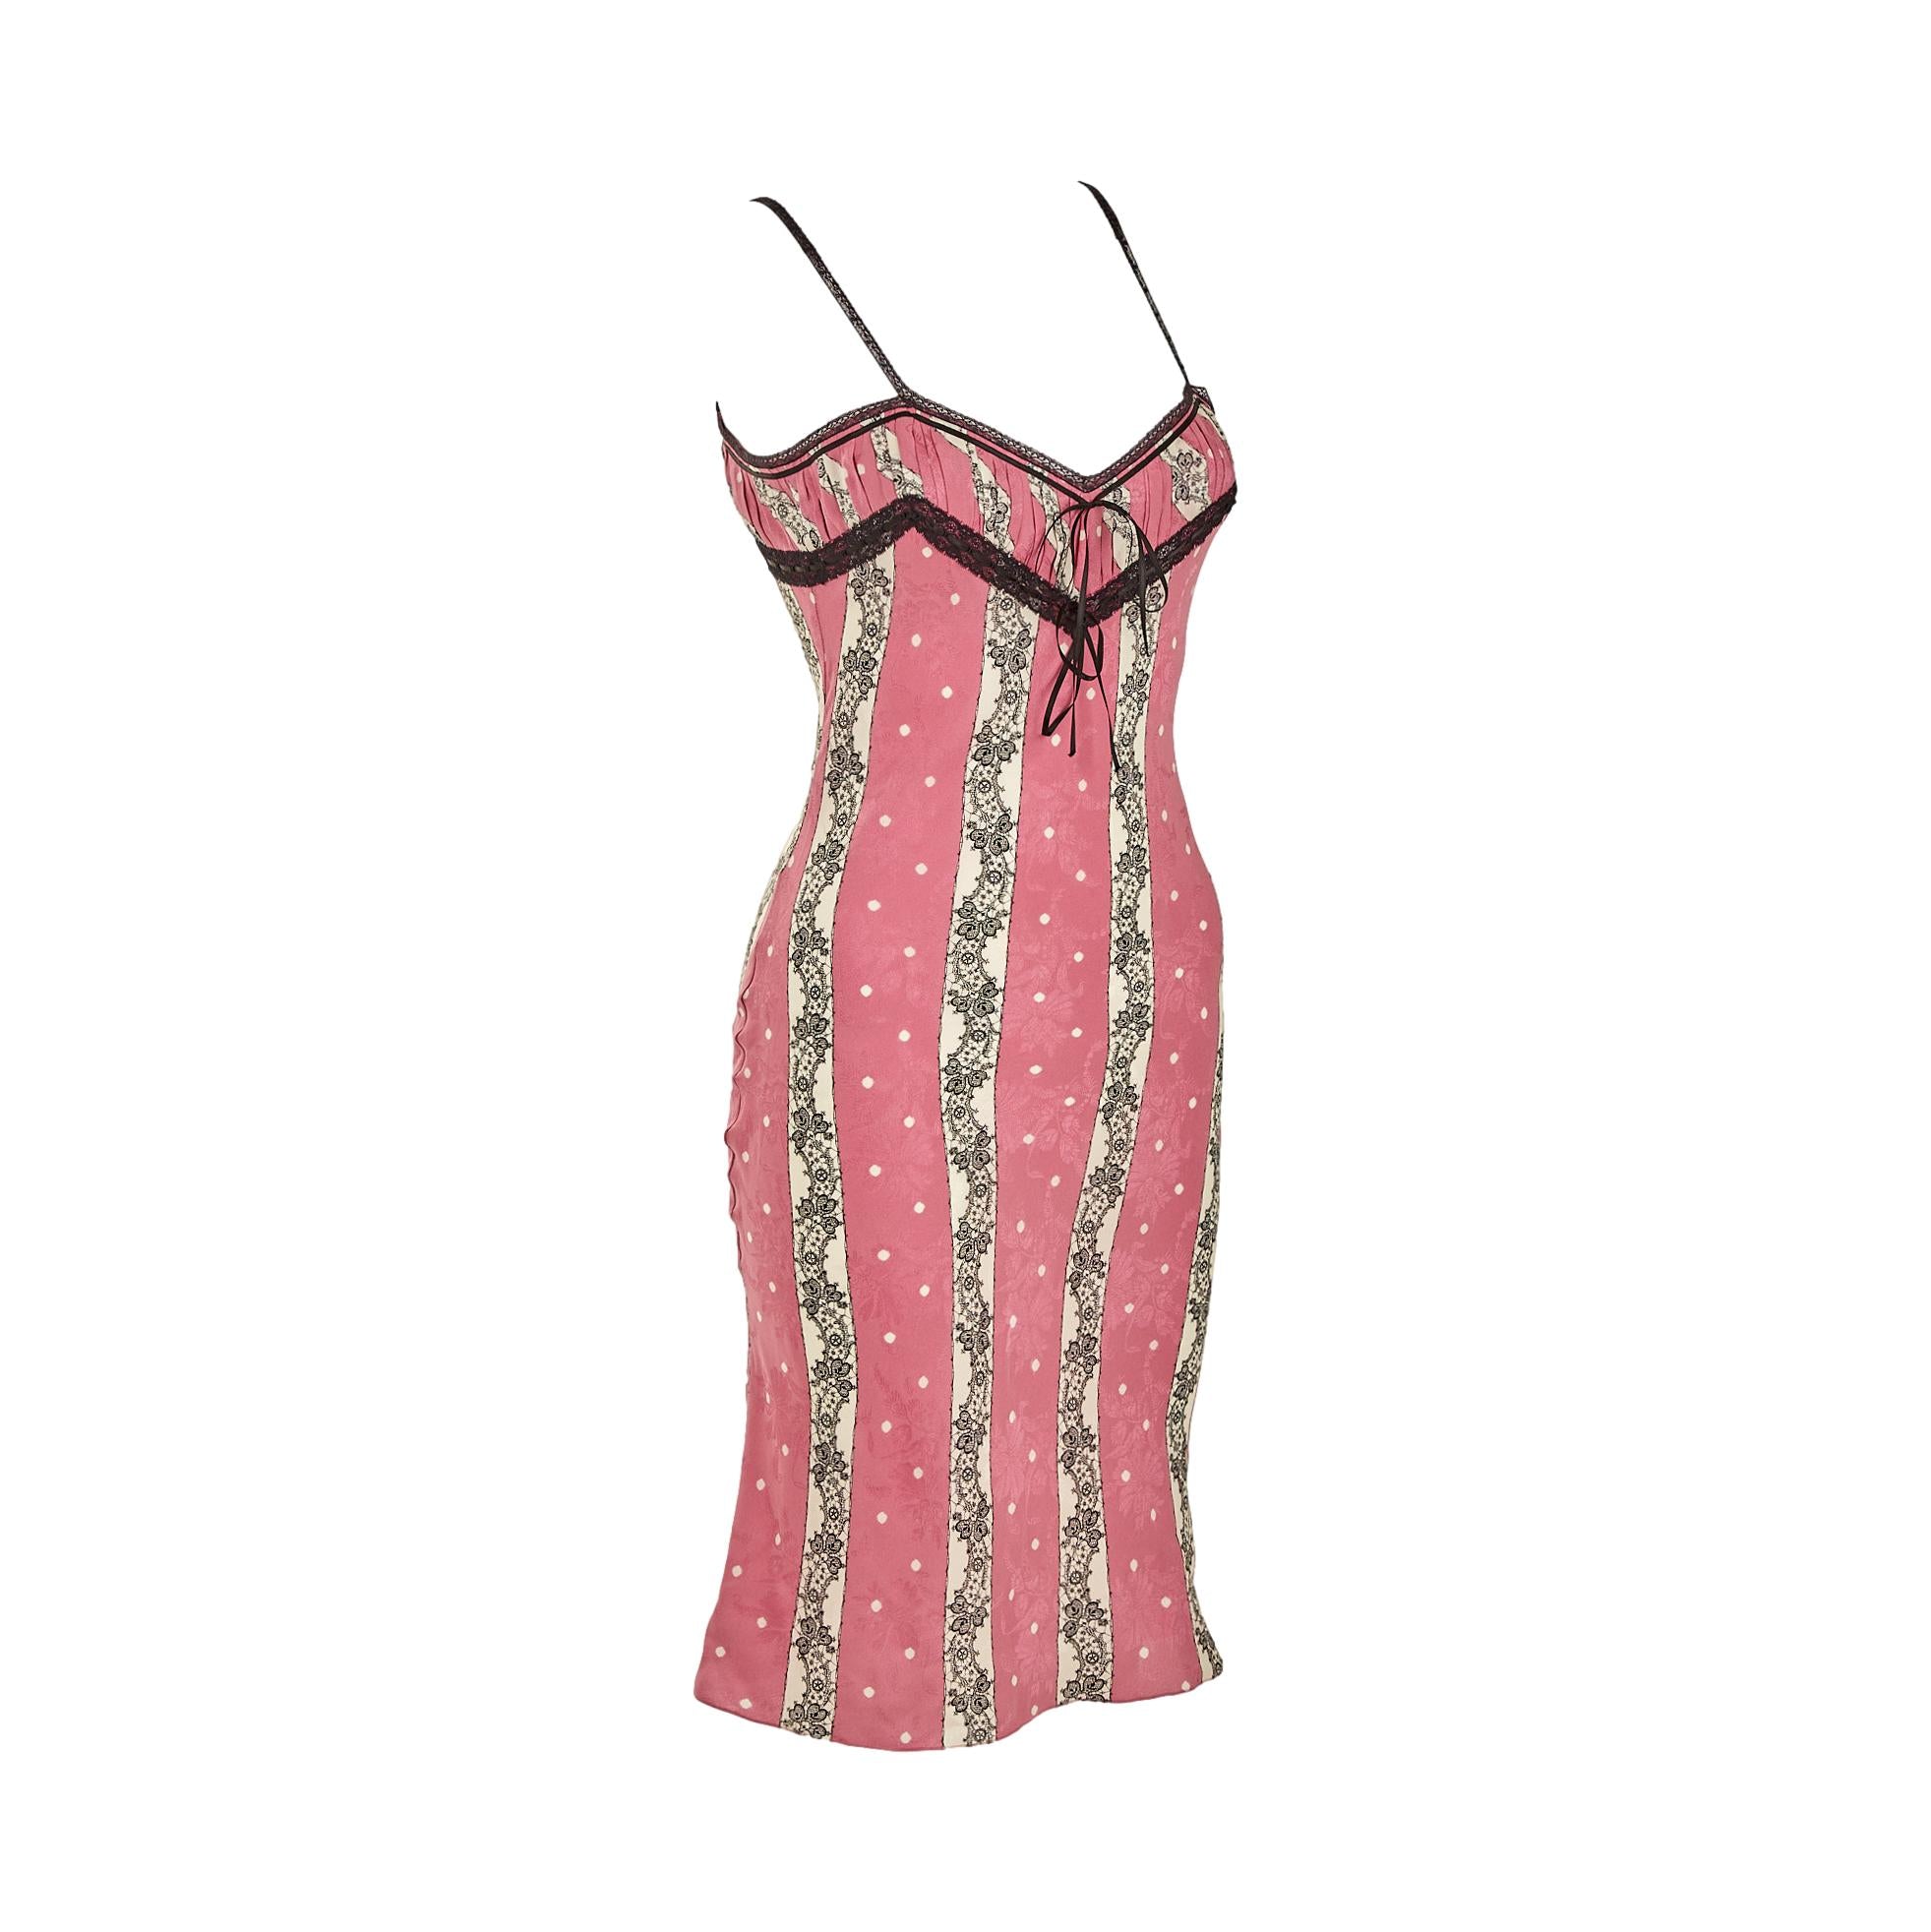 Galliano Pink Floral Lace Dress